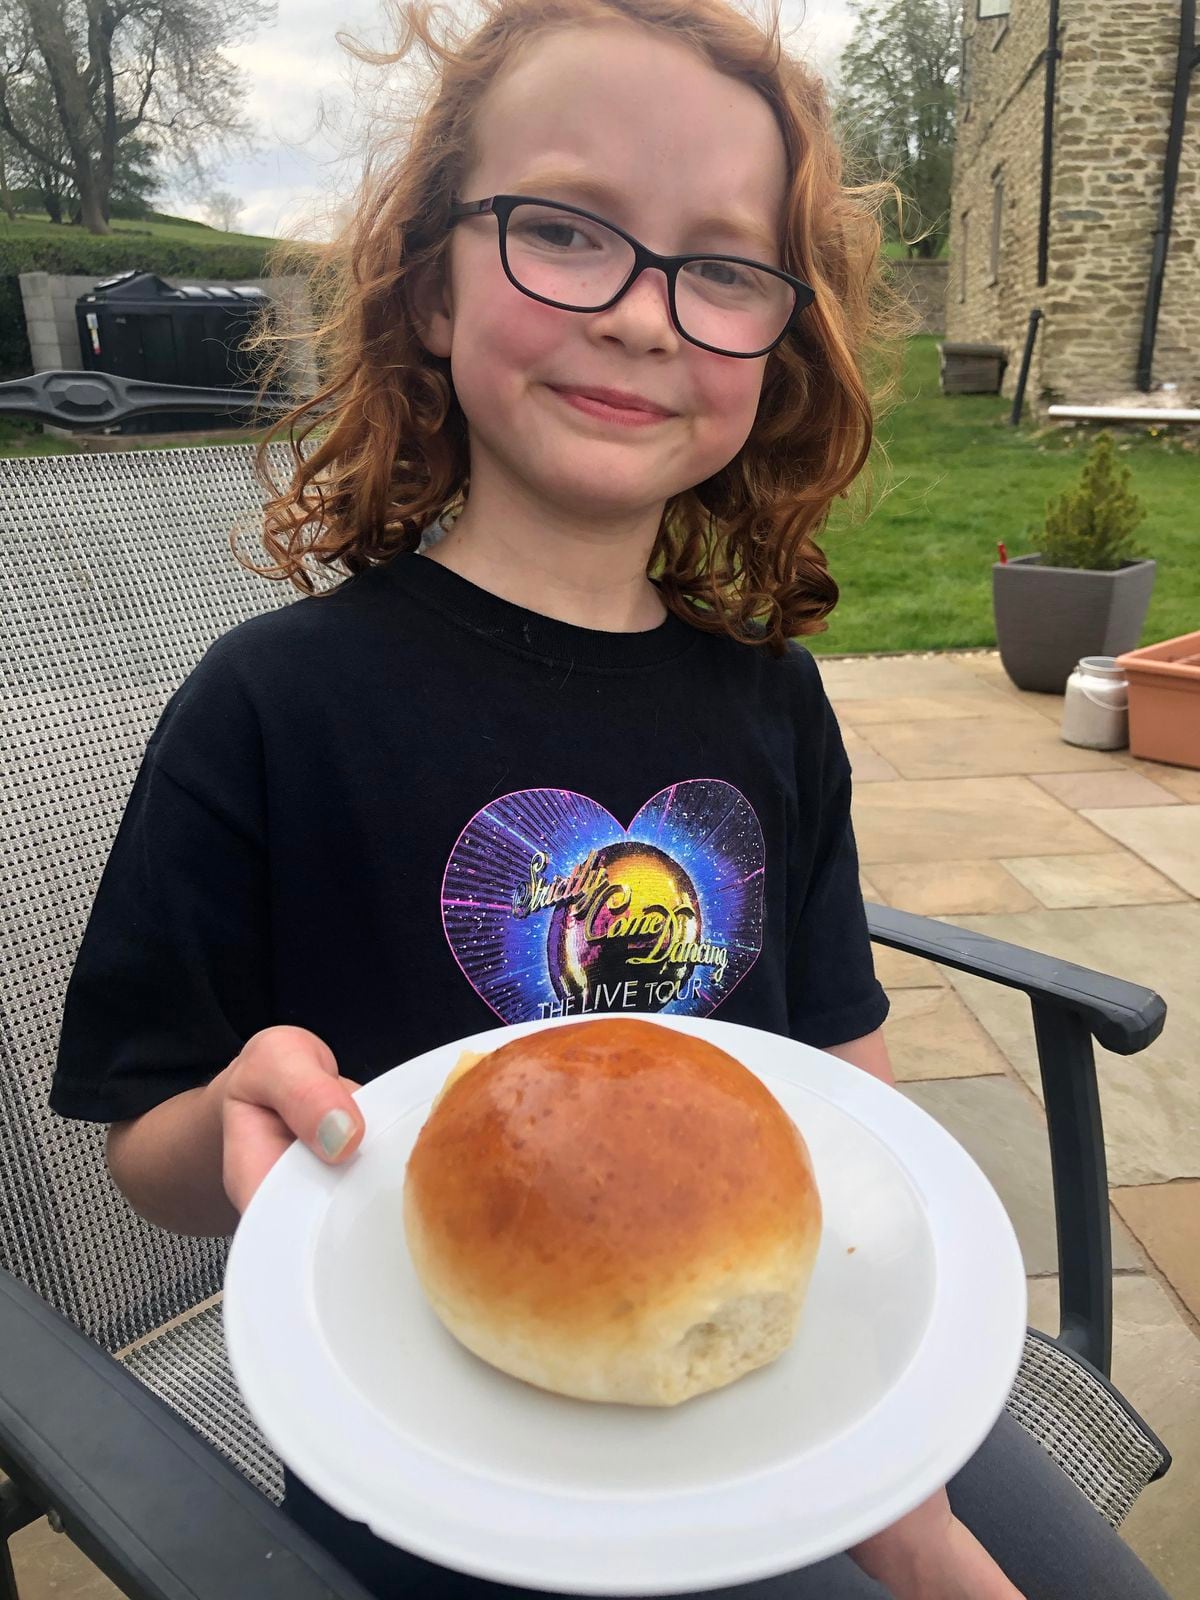 Aine Byrne, aged 9, from Bourton, Much Wenlock, has been improving her baking skills including here making burger rolls 